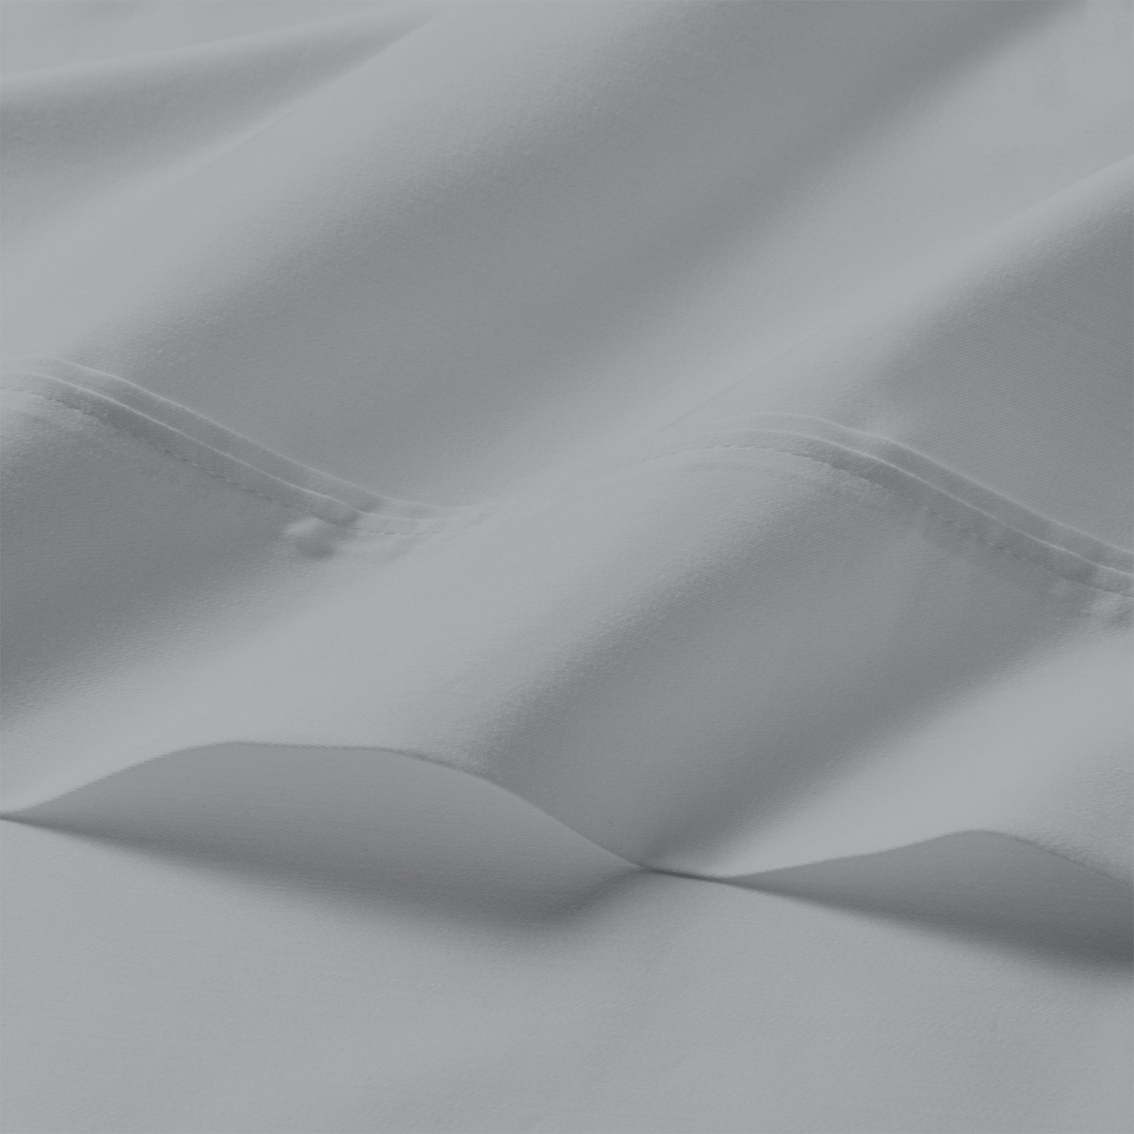 Indo Count Aireolux 1000 Thread Count Egyptian Cotton Sateen Sheet Set - Image 5 of 5